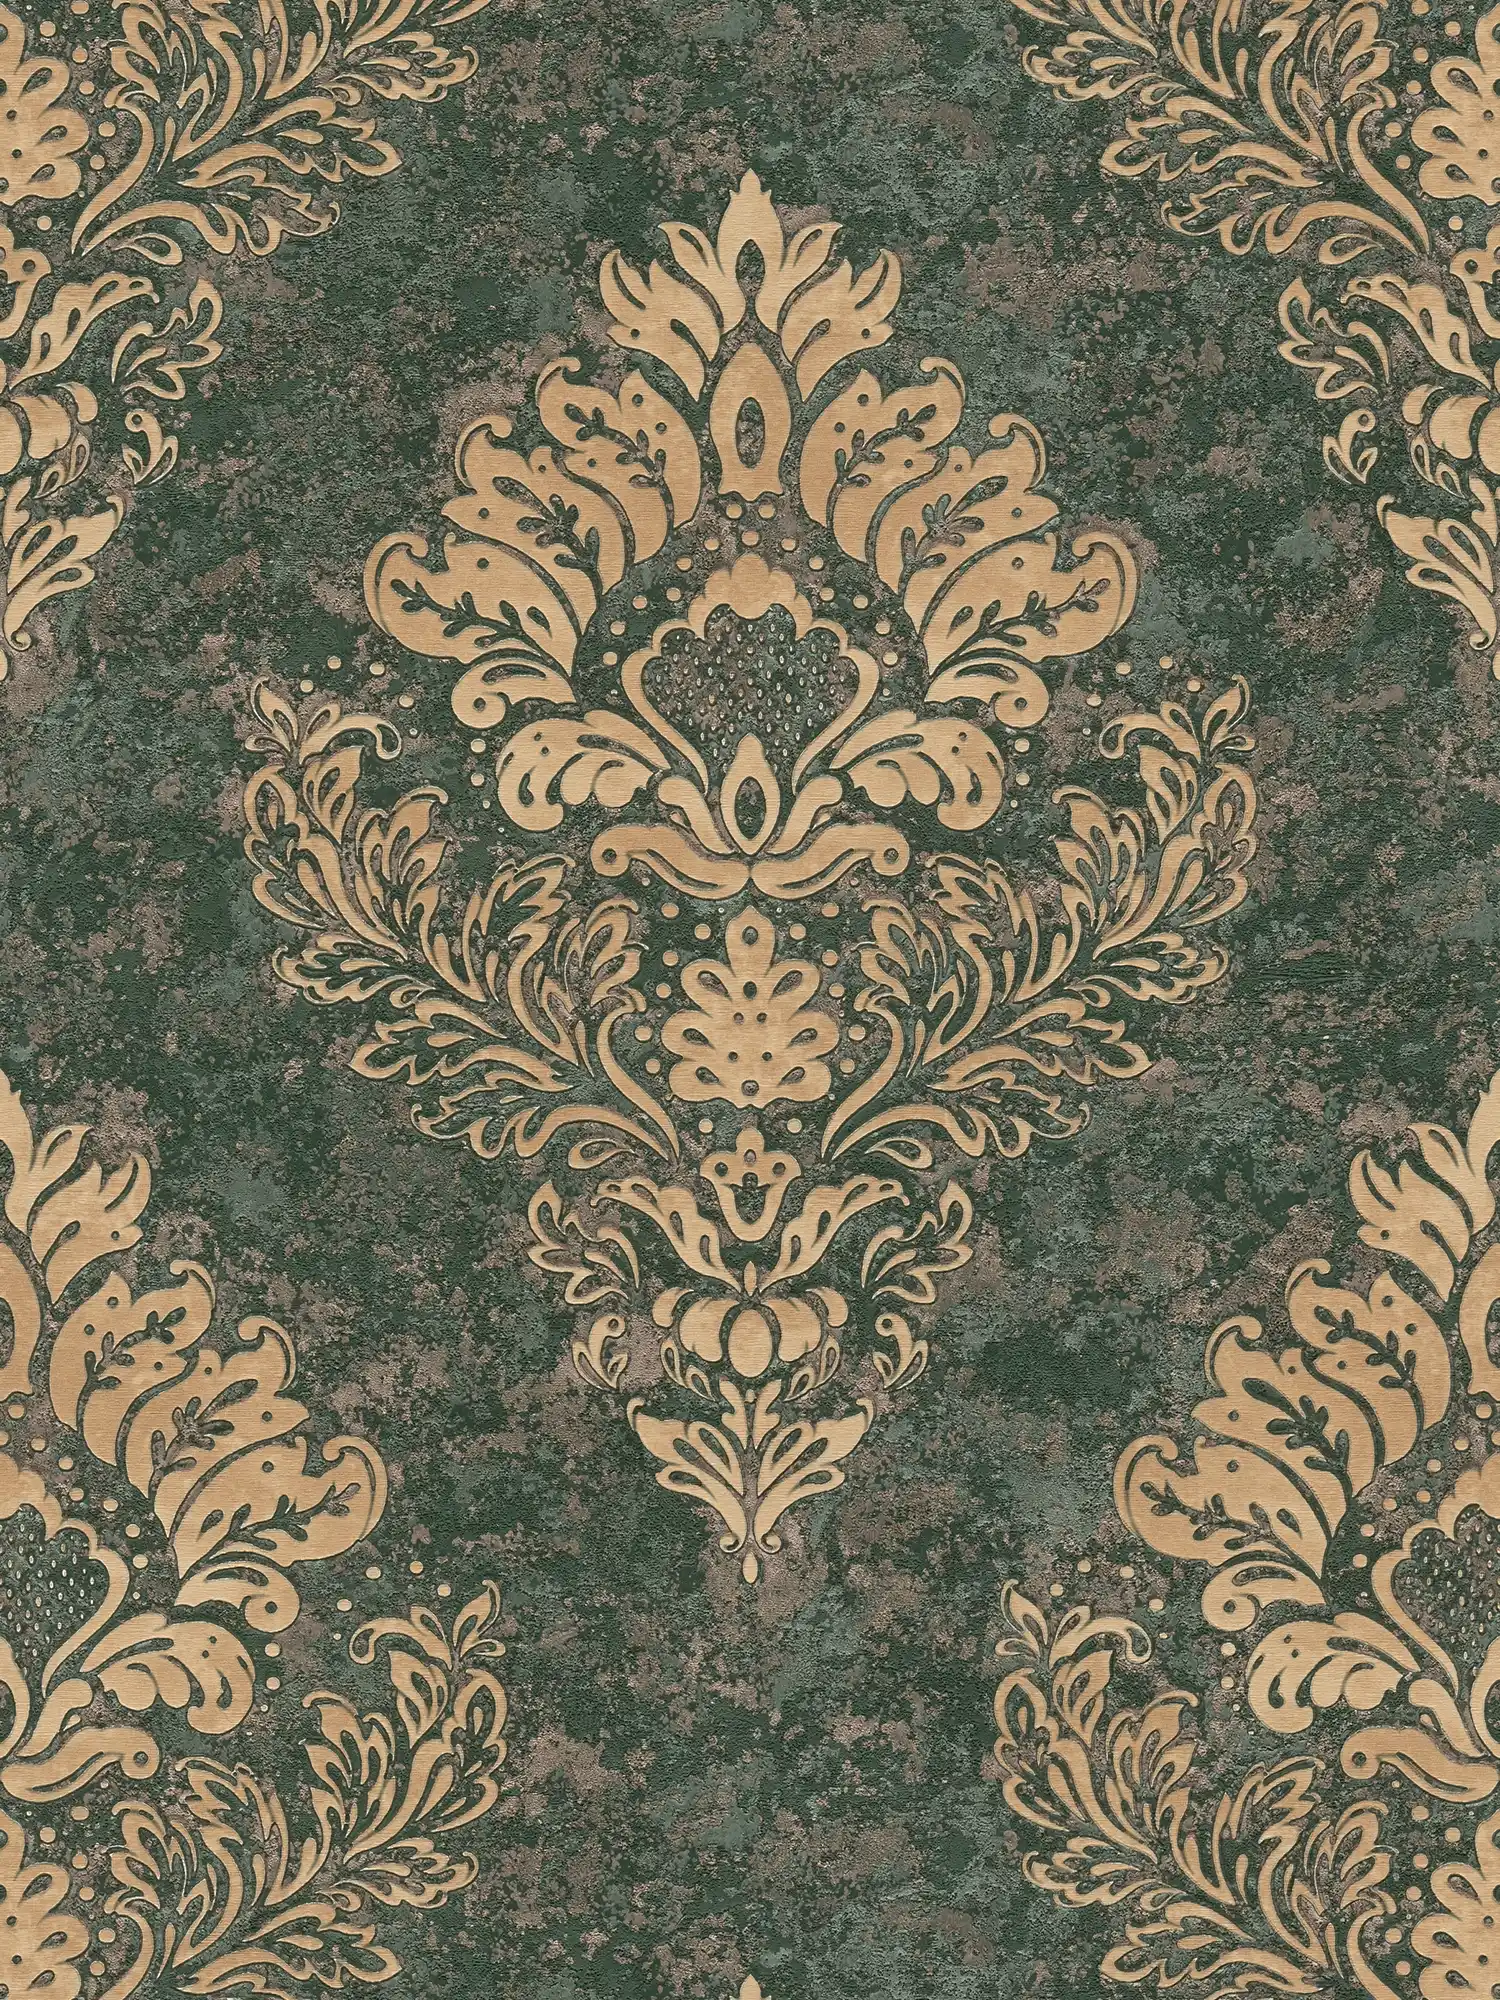         Ornamental wallpaper with floral style & gold effect - beige, brown, green
    